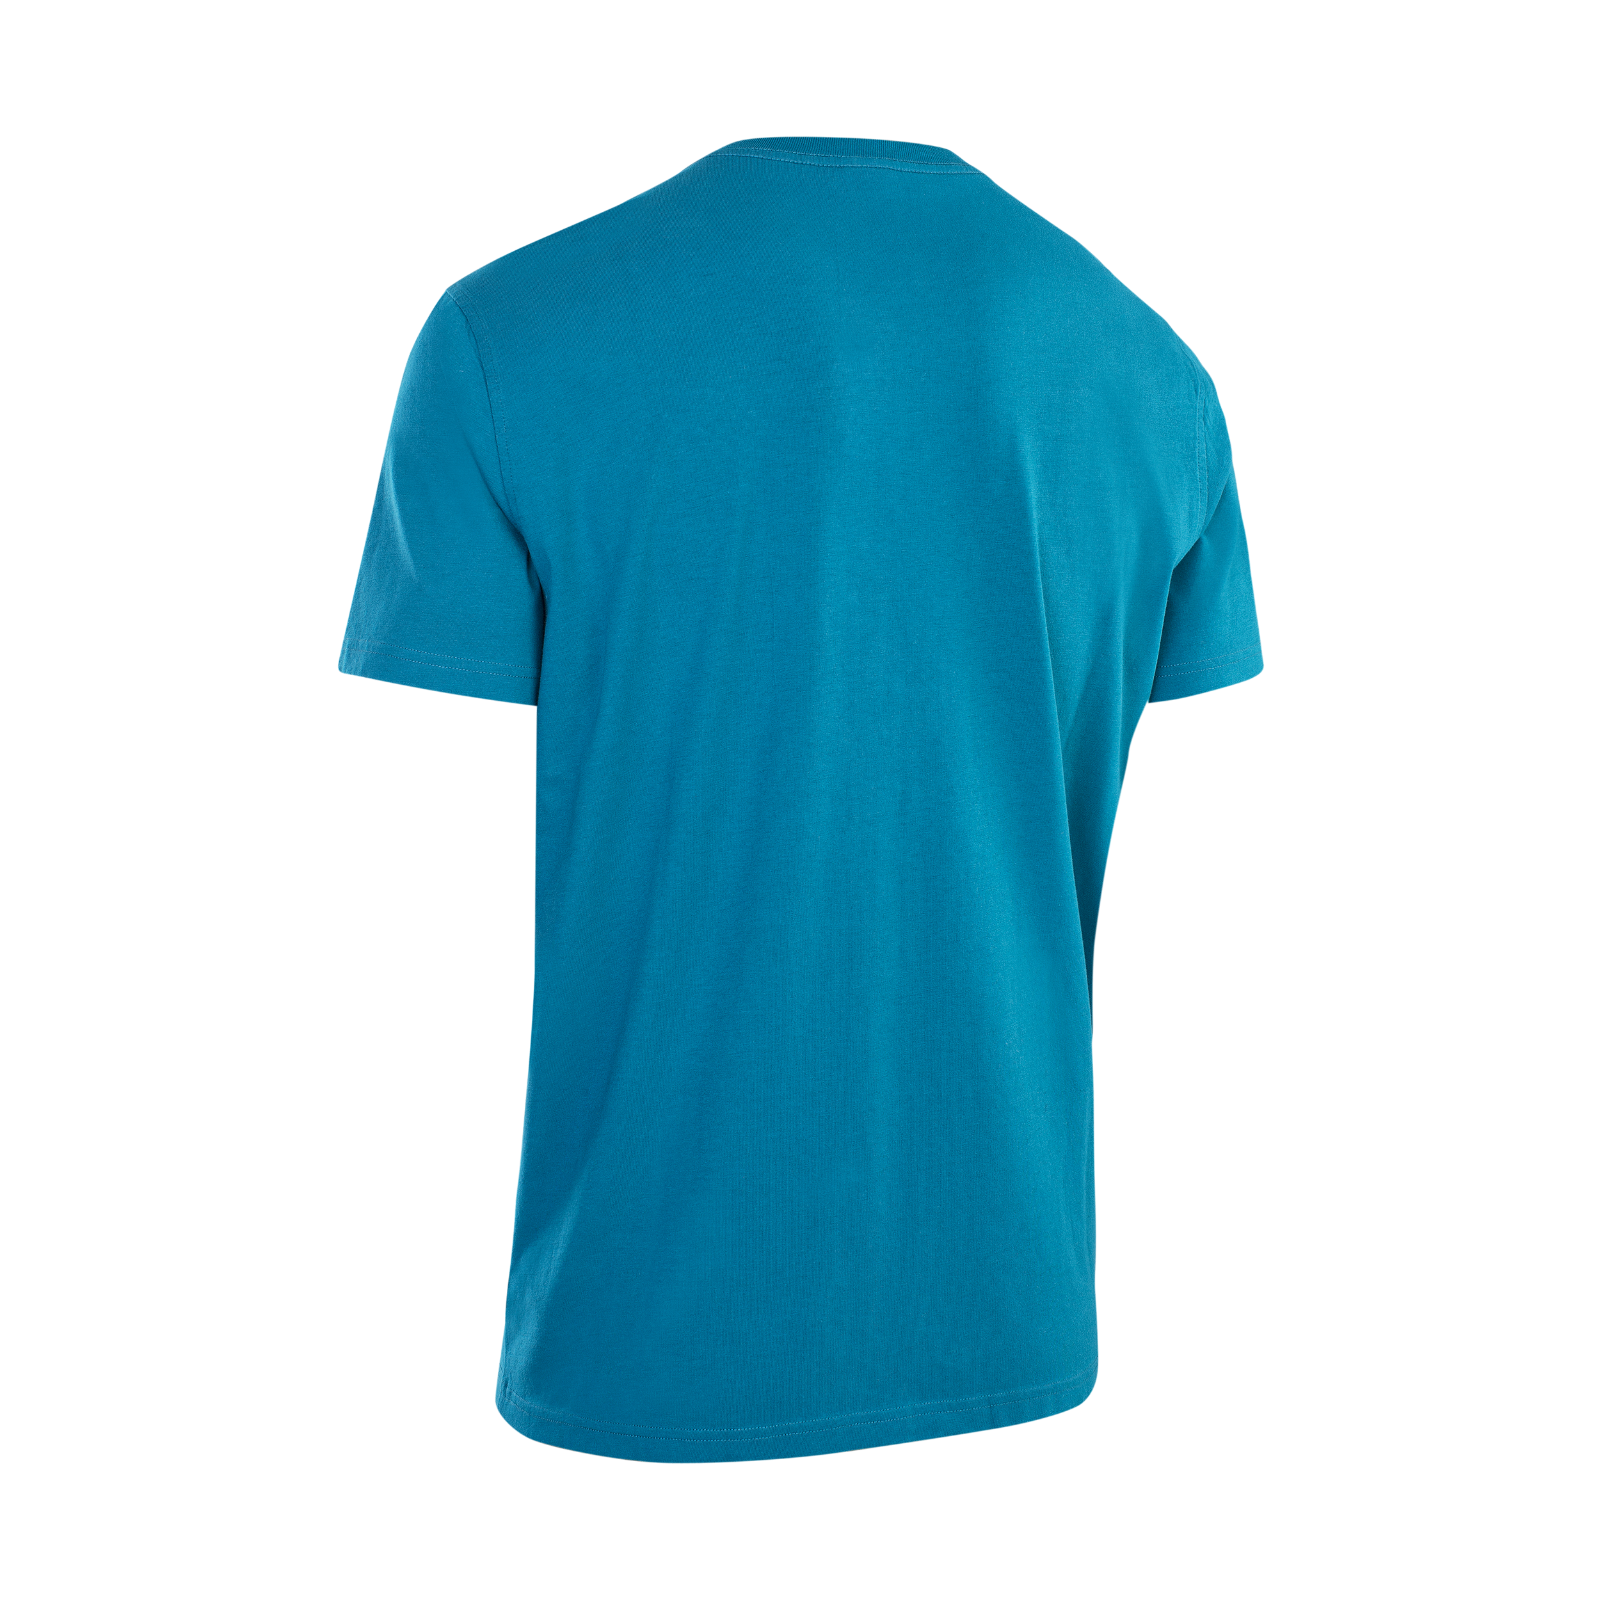 ION Tee Mood SS men 2022-ION Bike-L-Red-46222-5004-9010583036236-Surf-store.com